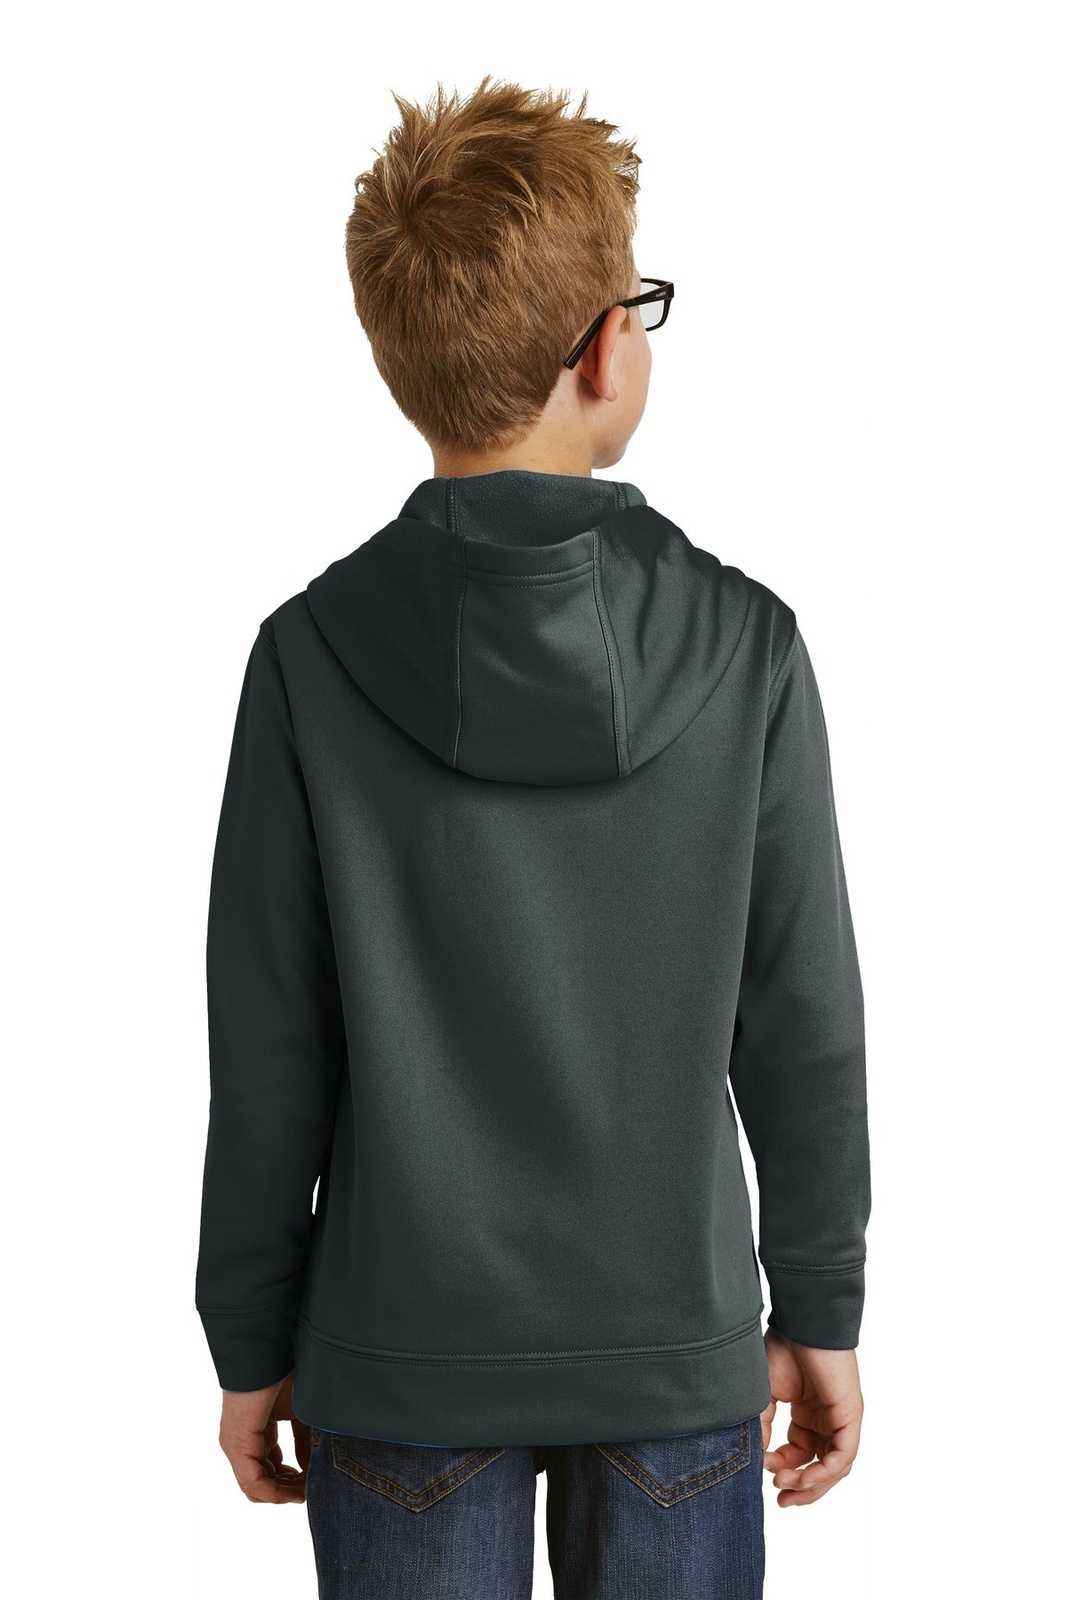 Port & Company PC590YH Youth Performance Fleece Pullover Hooded Sweatshirt - Jet Black - HIT a Double - 1